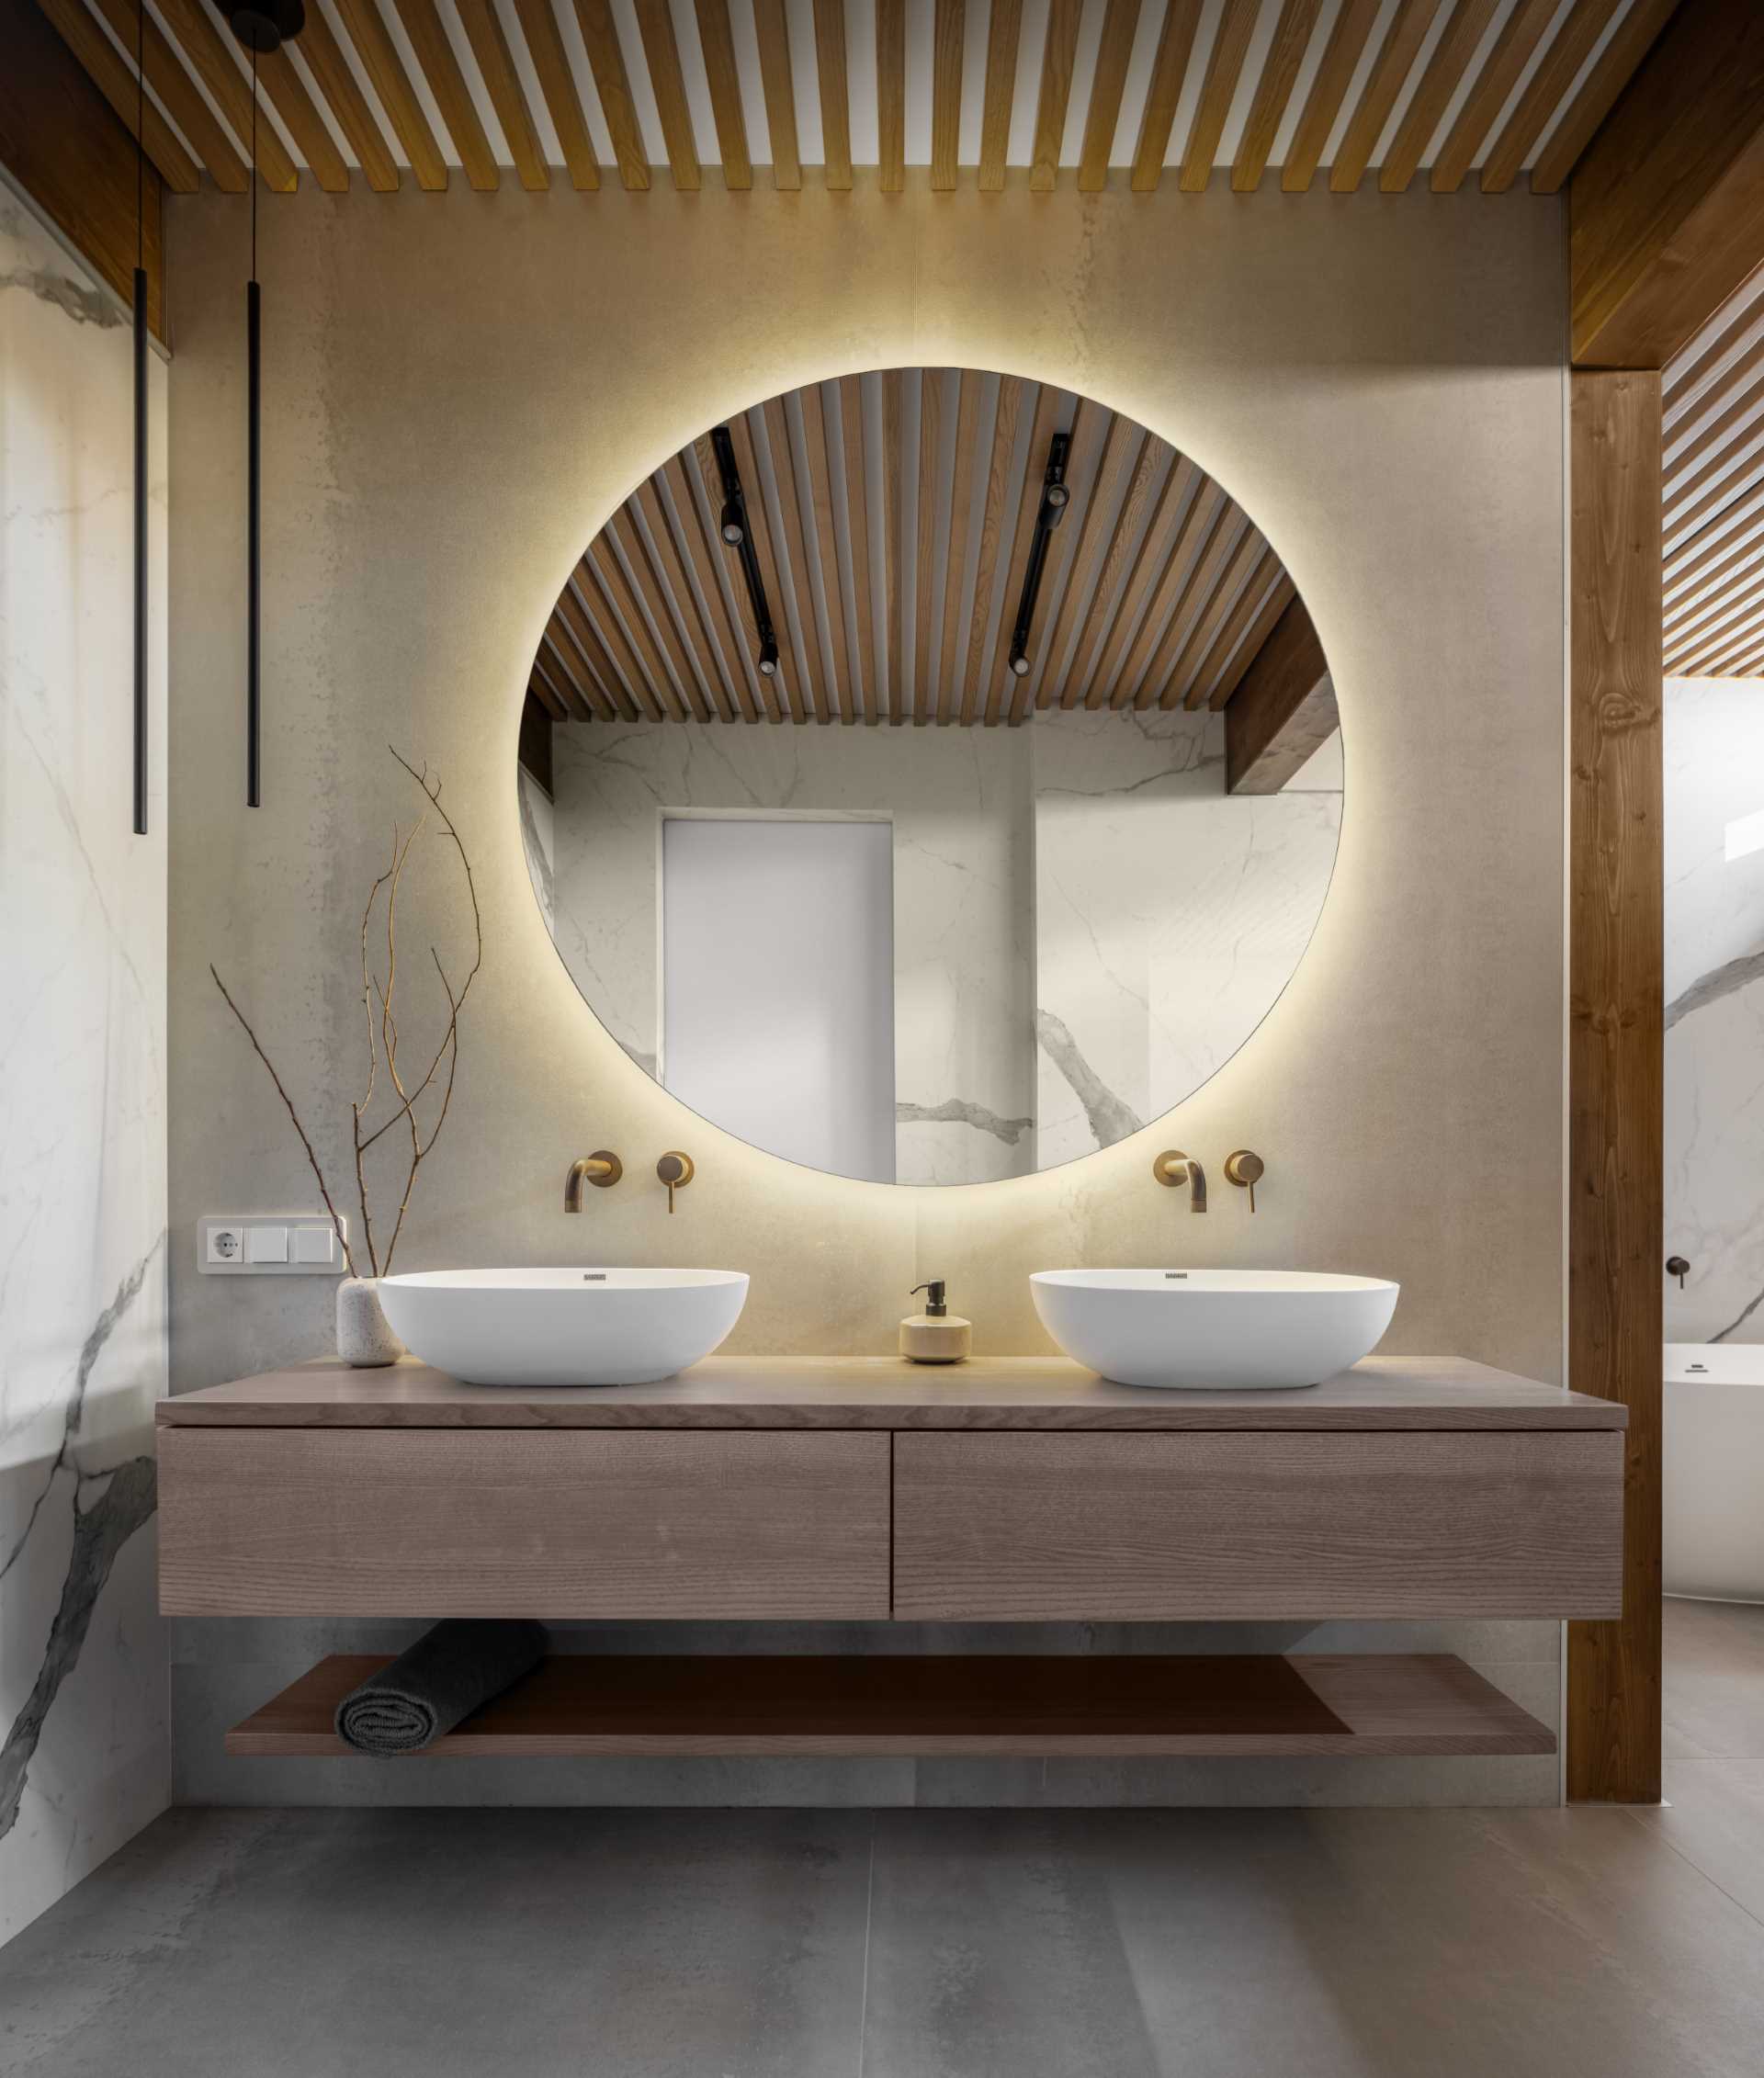 A modern bathroom with a floating wood vanity and a round backlit mirror.